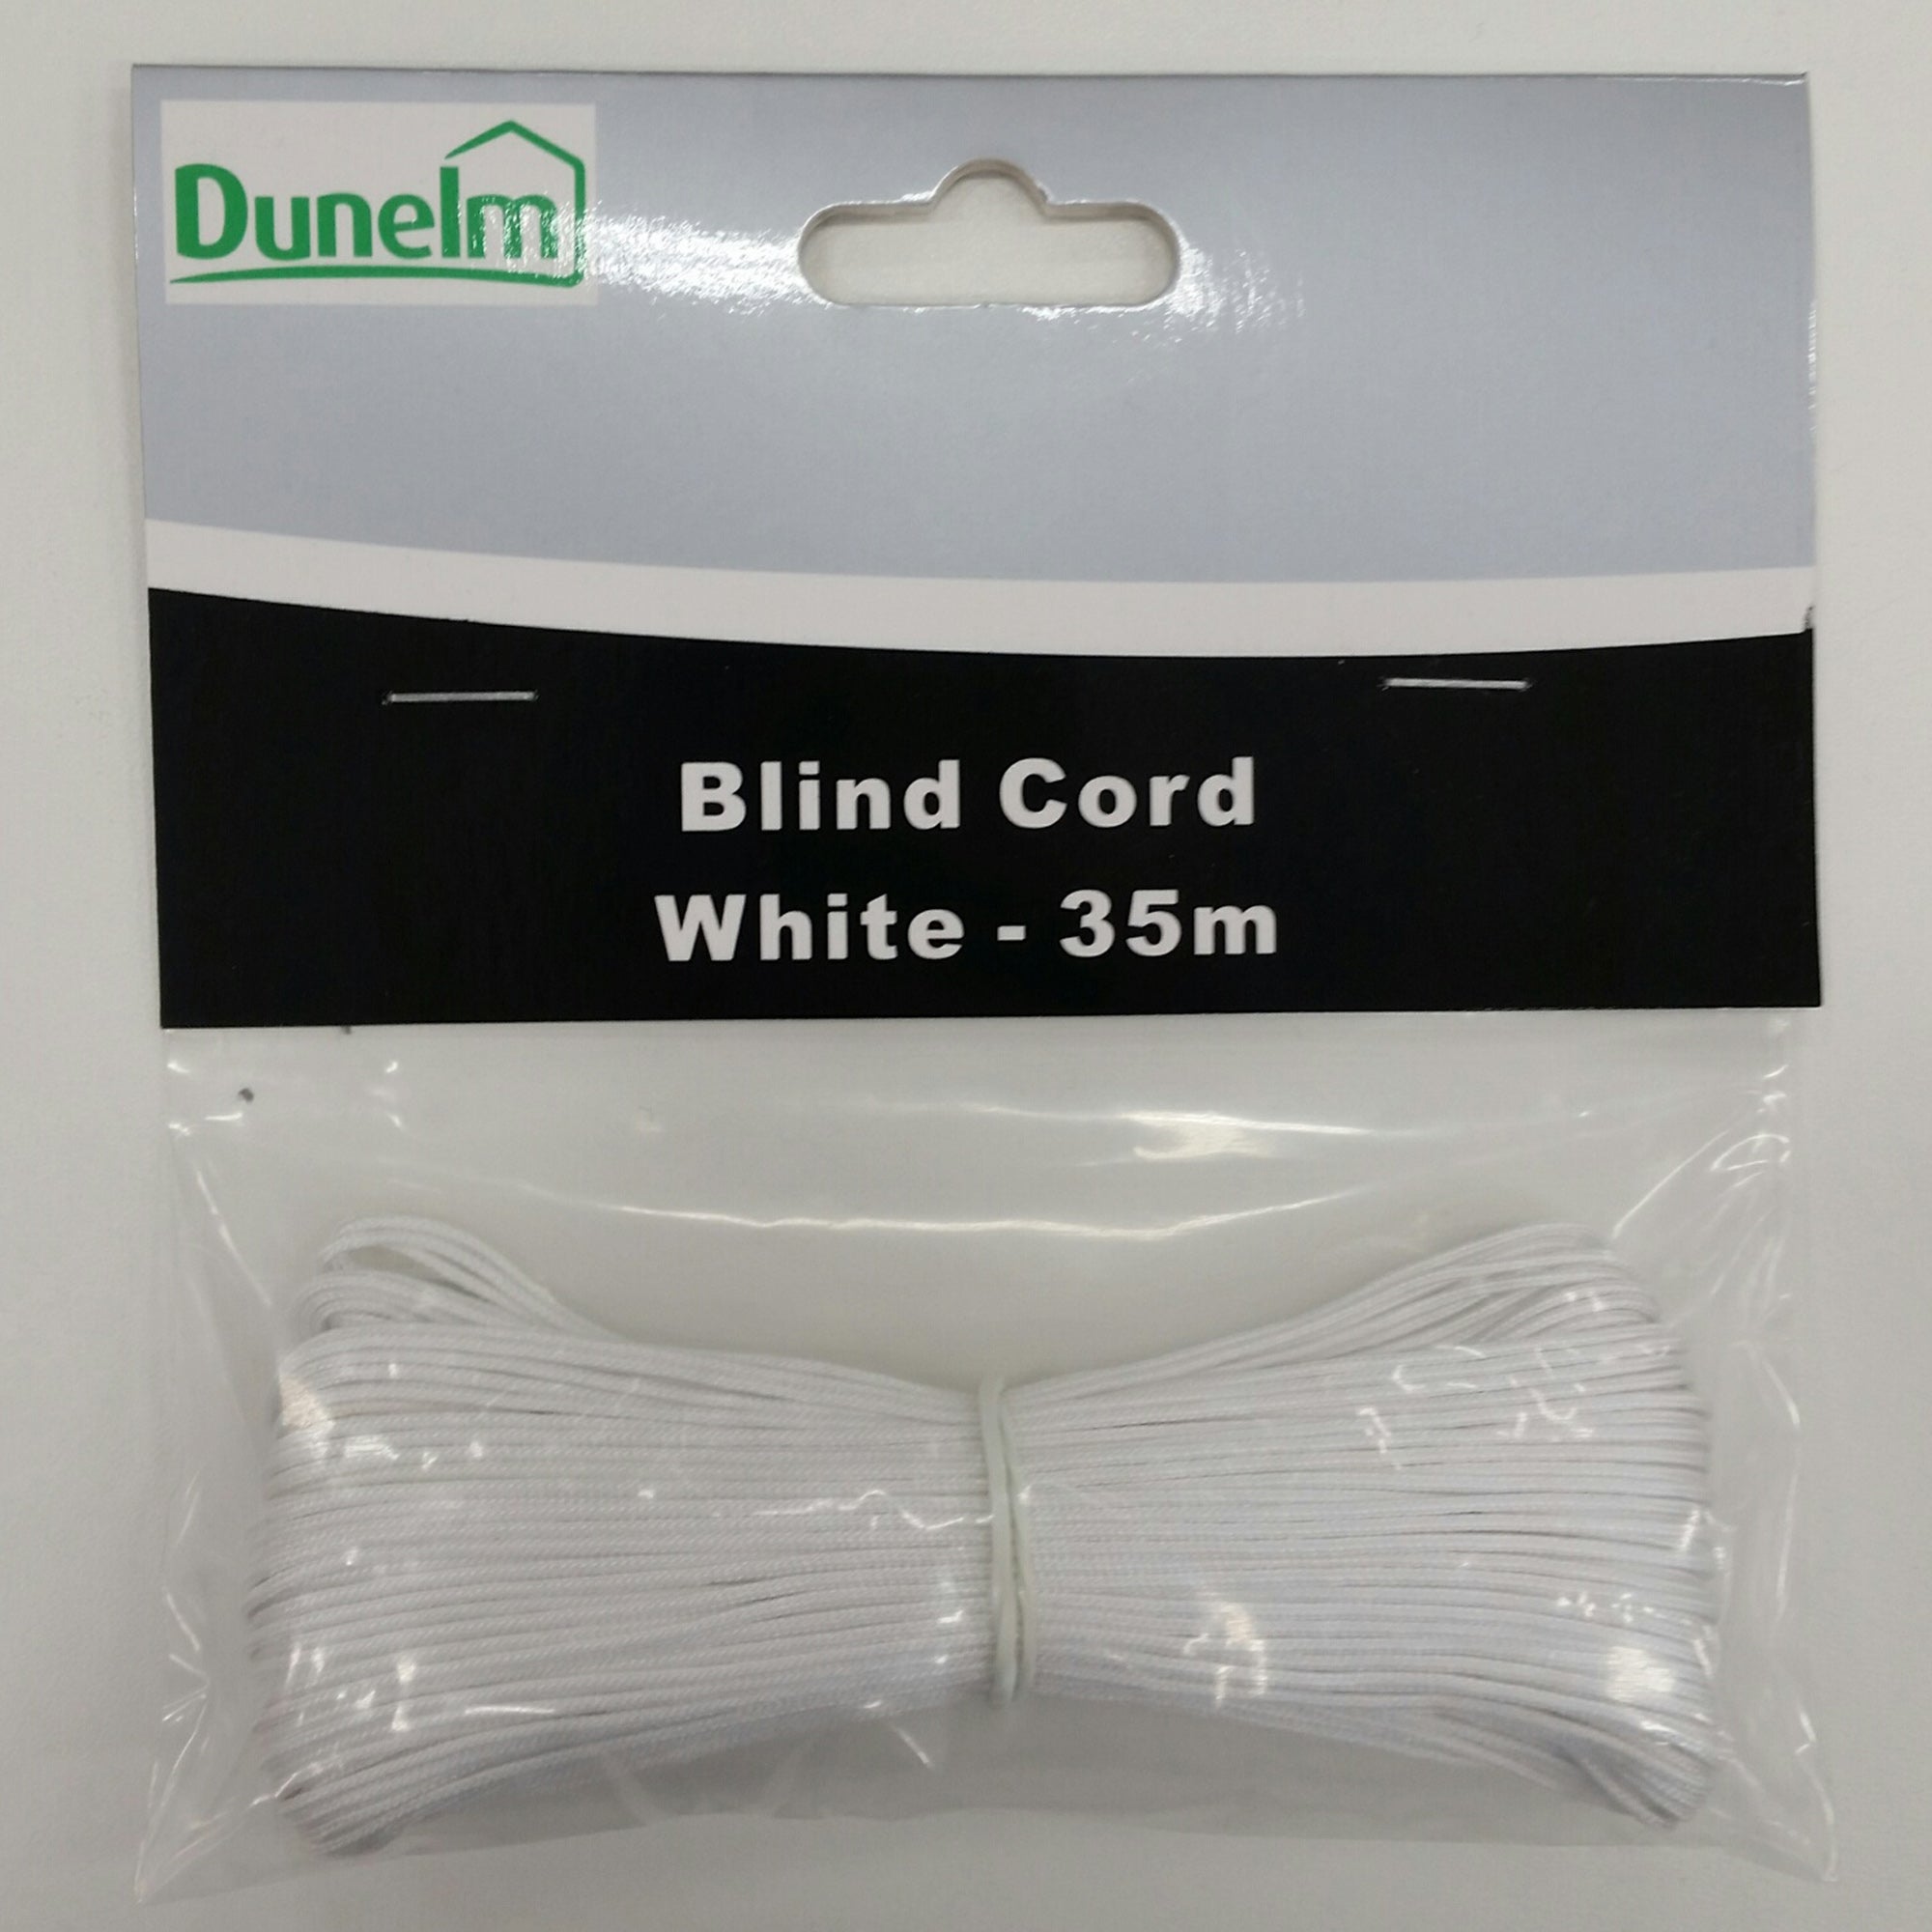 Blind Cord